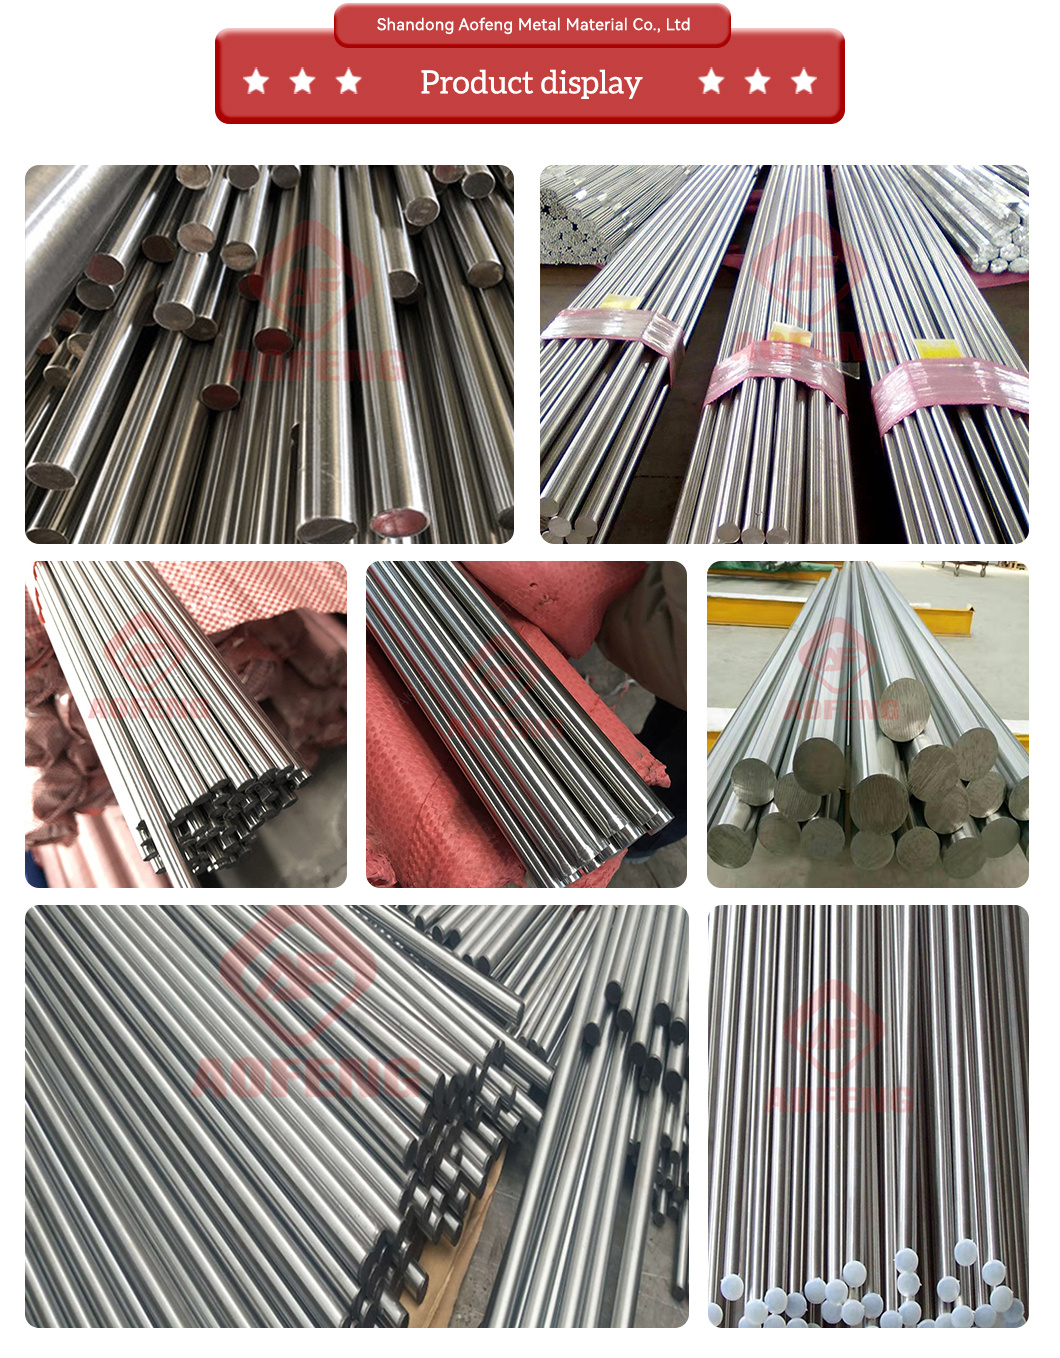 Factory Stainless Steel Rod 2.5mm 8mm Round Rod SS316 S31254 416 904 S31803 Ss Bar